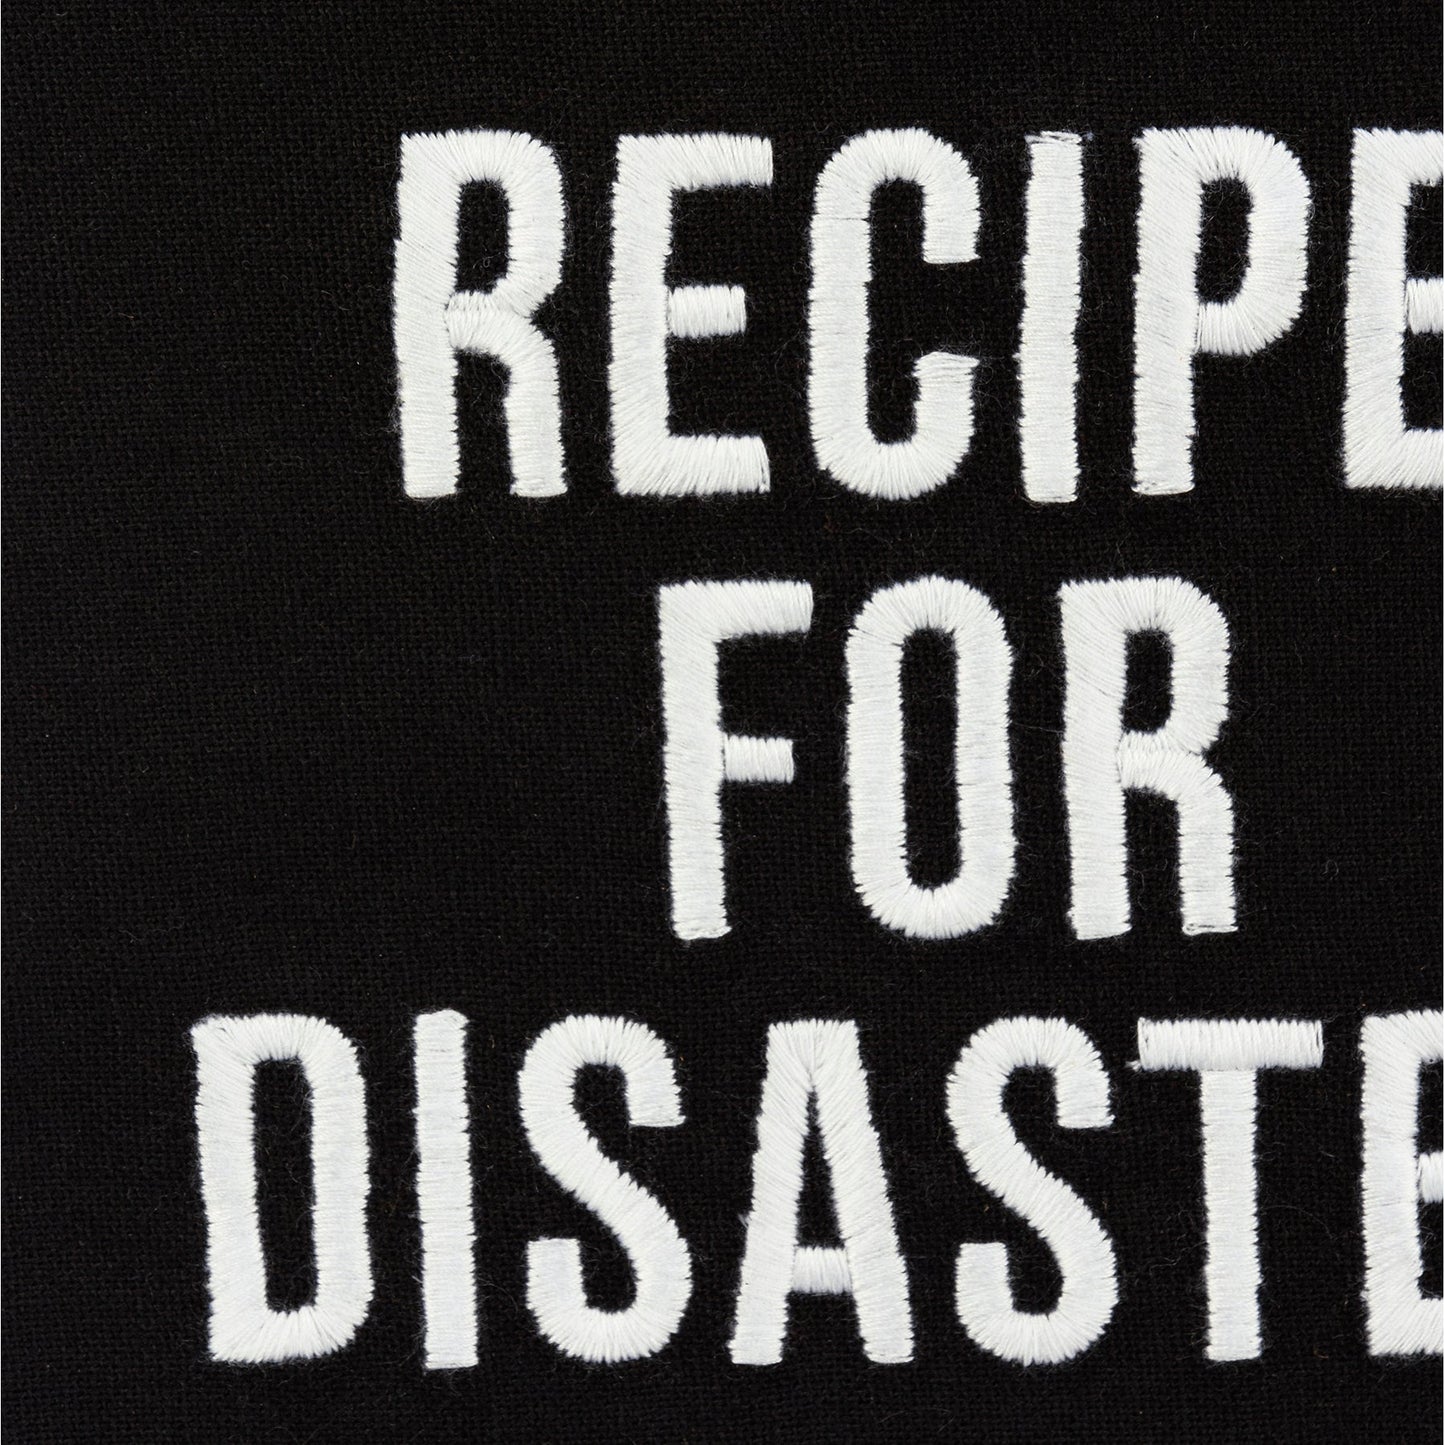 Recipe For Disaster Dish Cloth Towel | Novelty Tea Towel | Embroidered Text | 20" x 28"